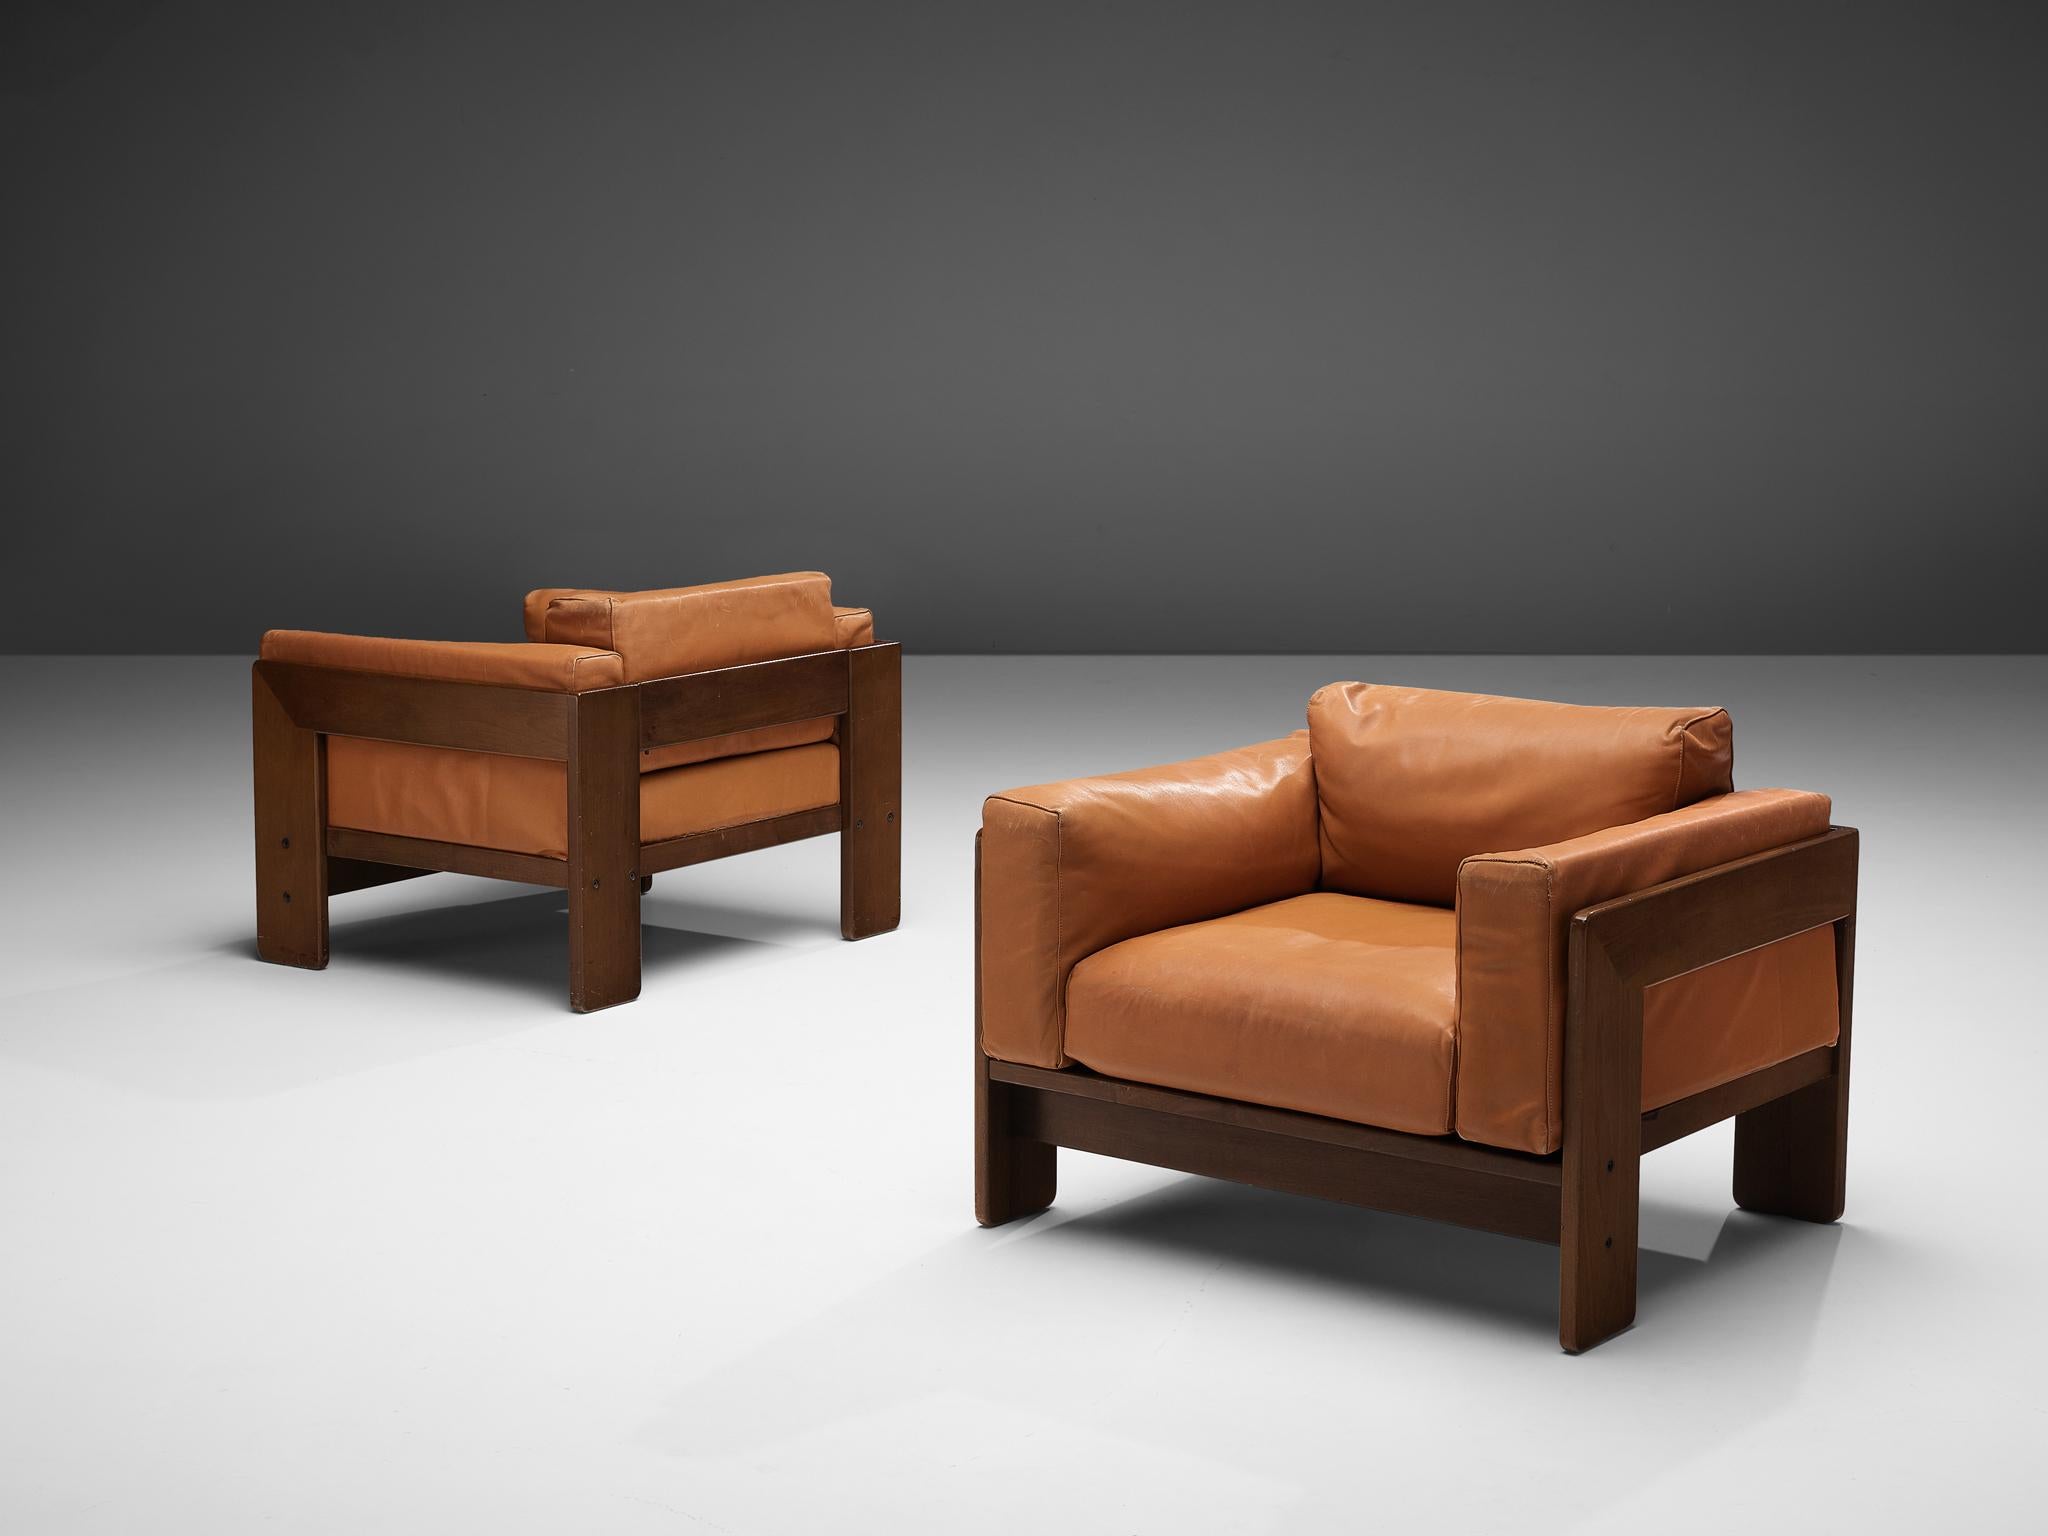 Tobia Scarpa for Knoll, pair of 'Bastiano' club chairs, cognac leather and walnut, Italy, design 1960, manufactured in 1970s

Beautiful pair of Bastiano club chairs made with a walnut frame and cognac leather upholstery. Tobia Scarpa designed the